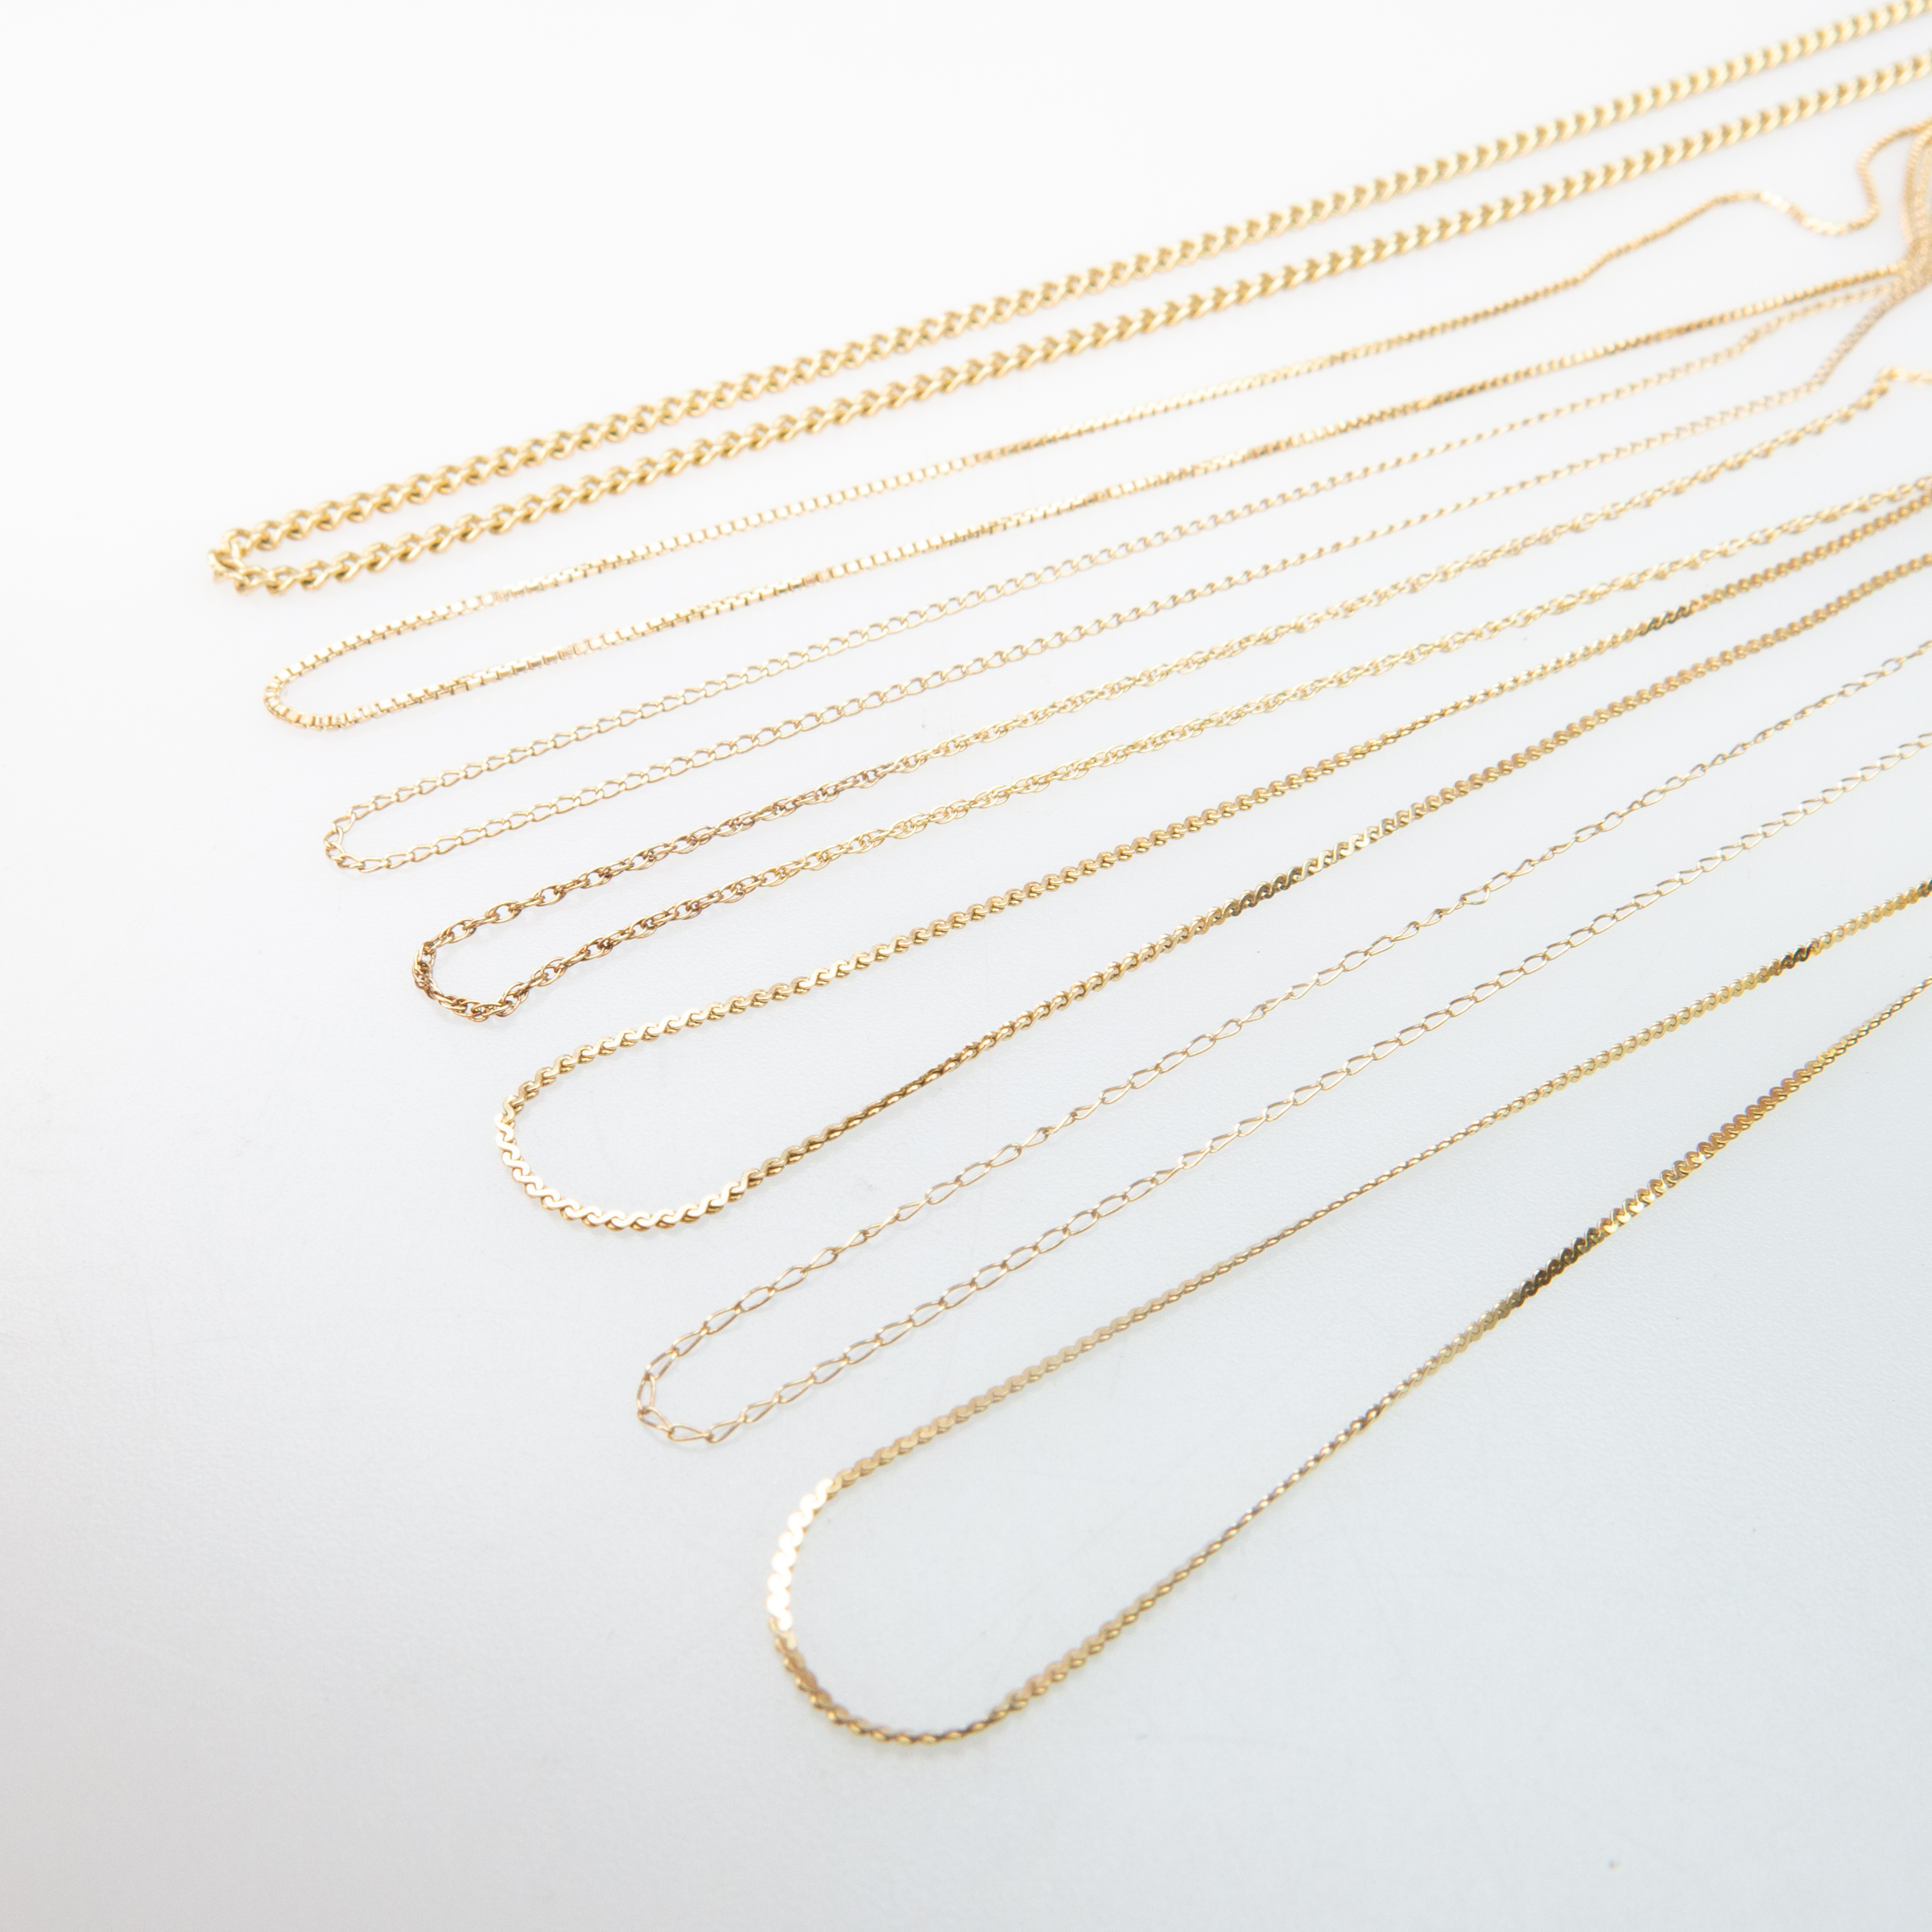 7 x 14k Yellow Gold Chains